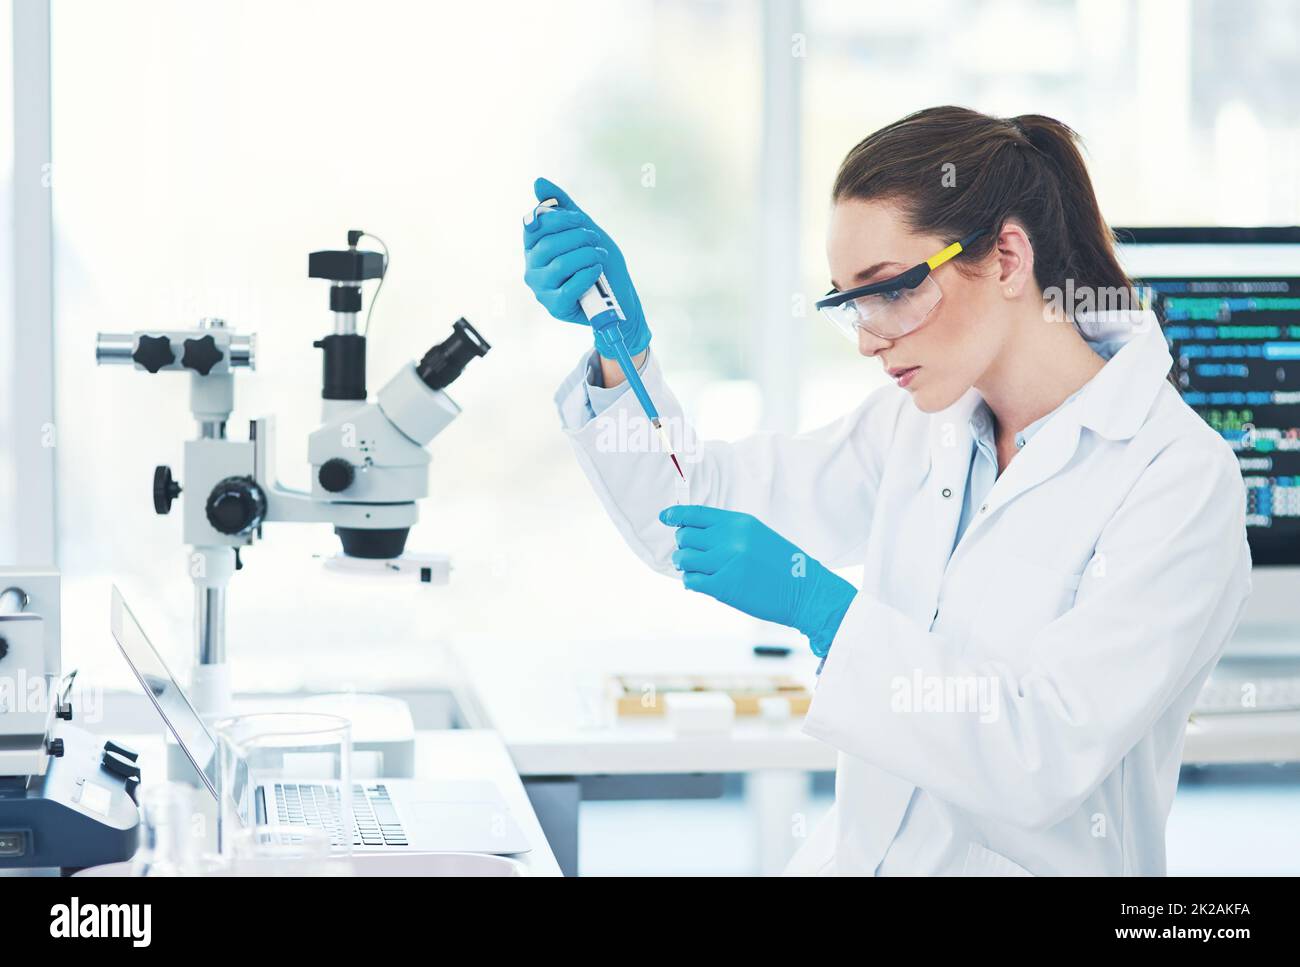 Shes in concentration mode. Cropped shot of a focused young female scientist wearing protective glasses while pouring a test sample into a vile inside of a laboratory. Stock Photo